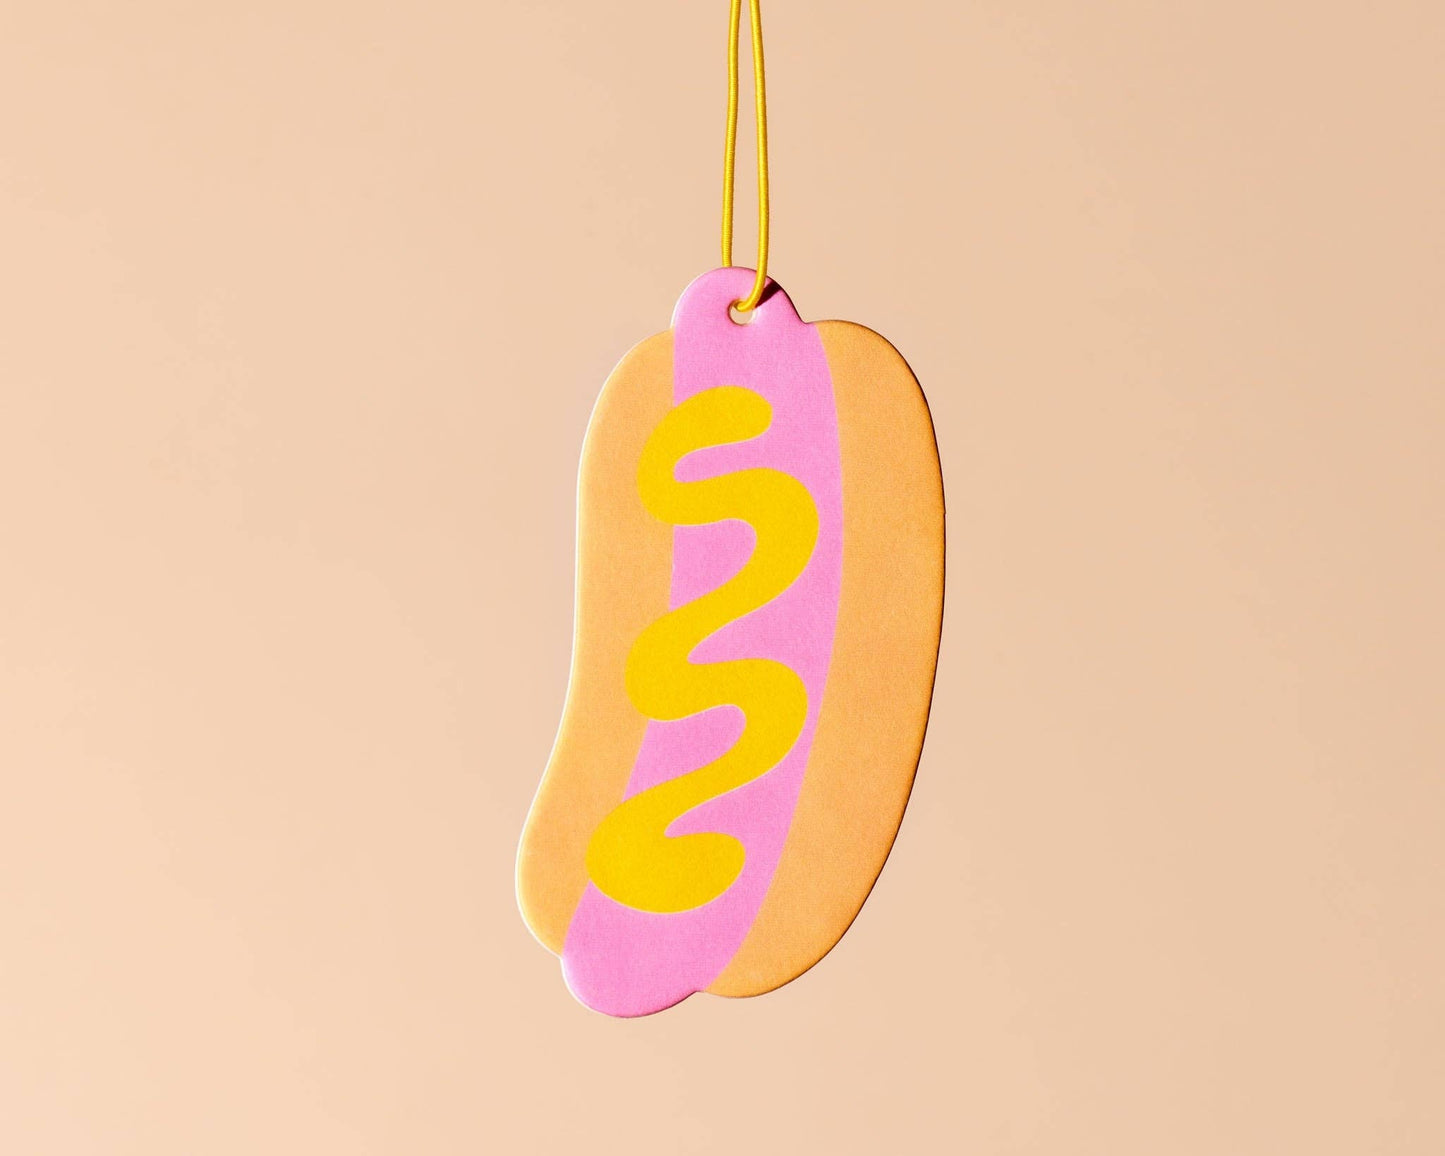 Double sided car air freshener made to look like a hot dog. Has sliver of mustard on it. 